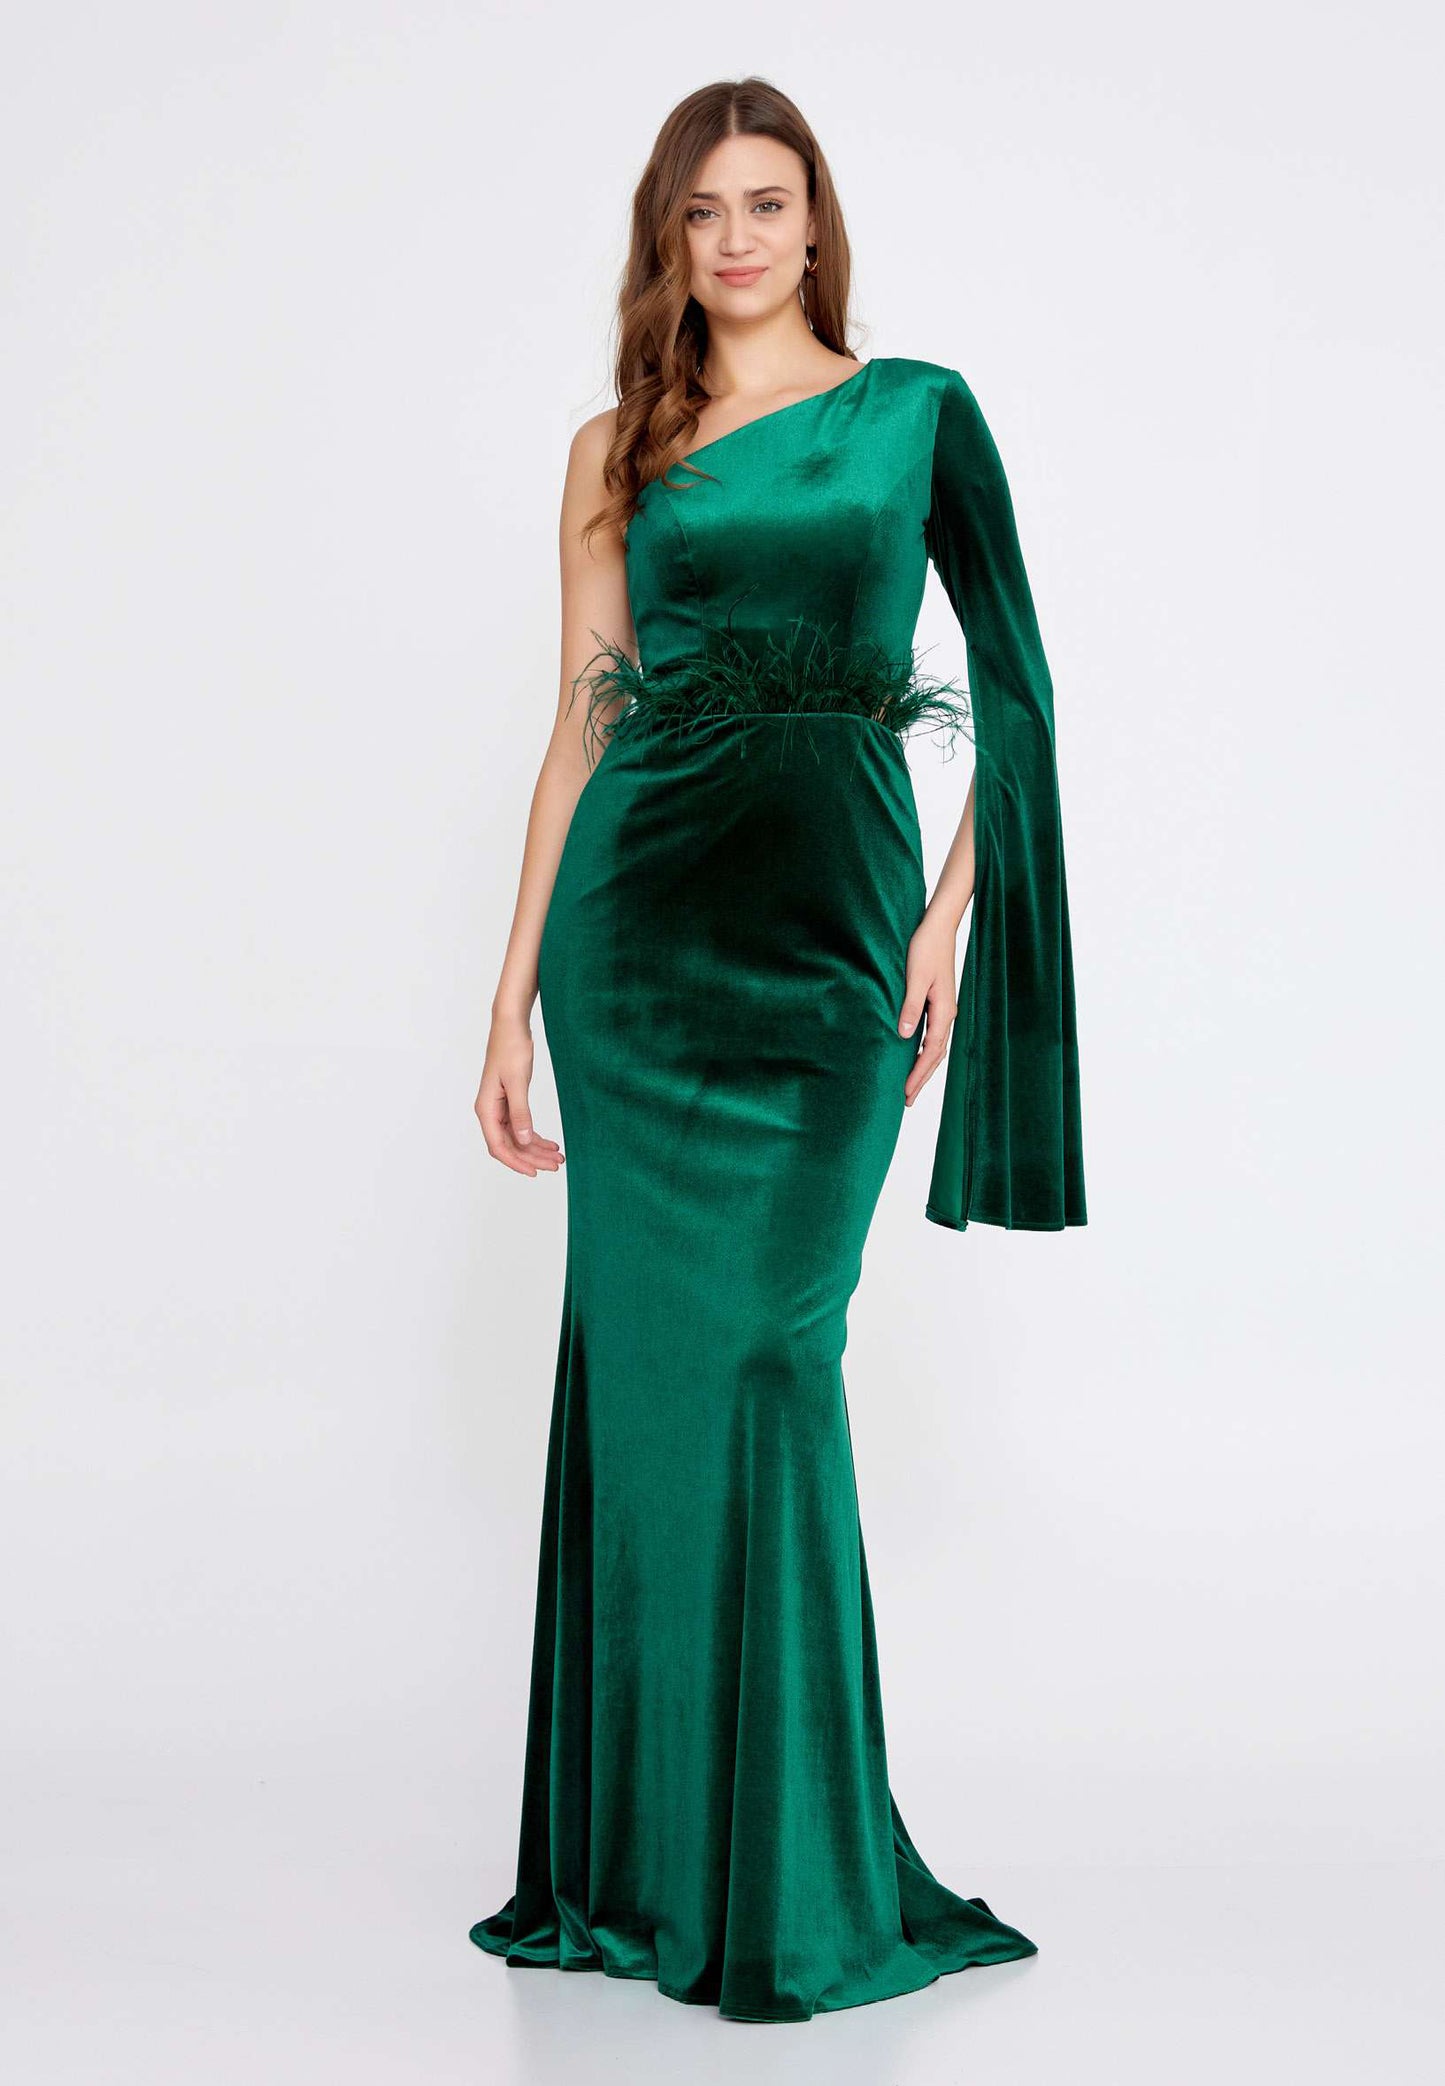 Valencia - Mystic Evenings | Evening and Prom Dresses